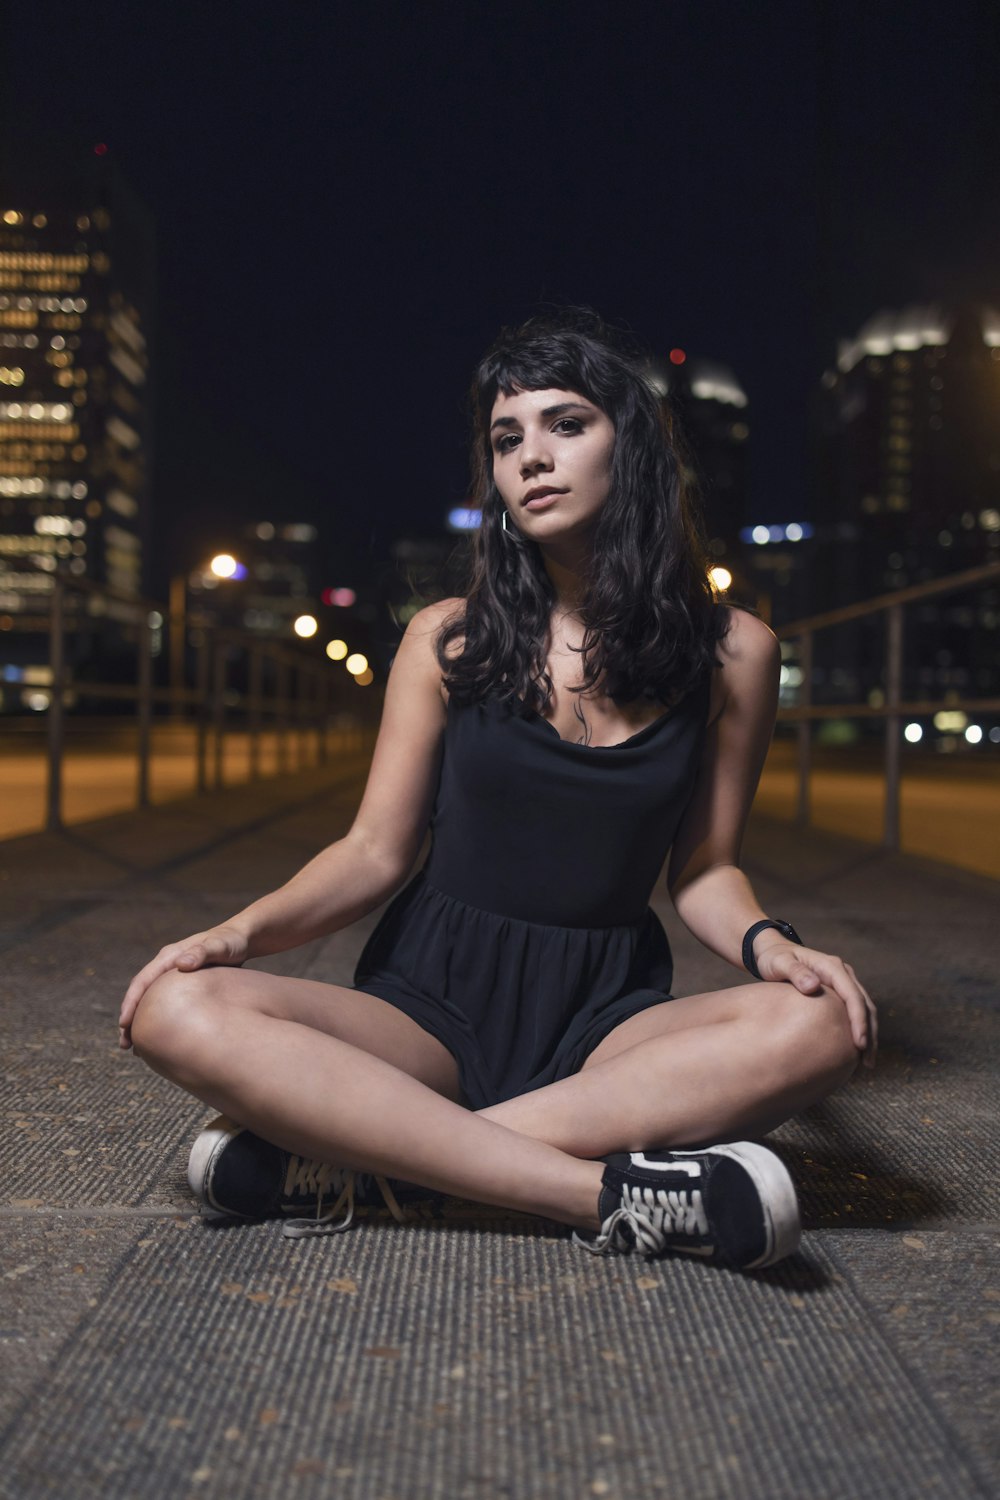 woman in black tank top and black shorts sitting on gray concrete floor during night time